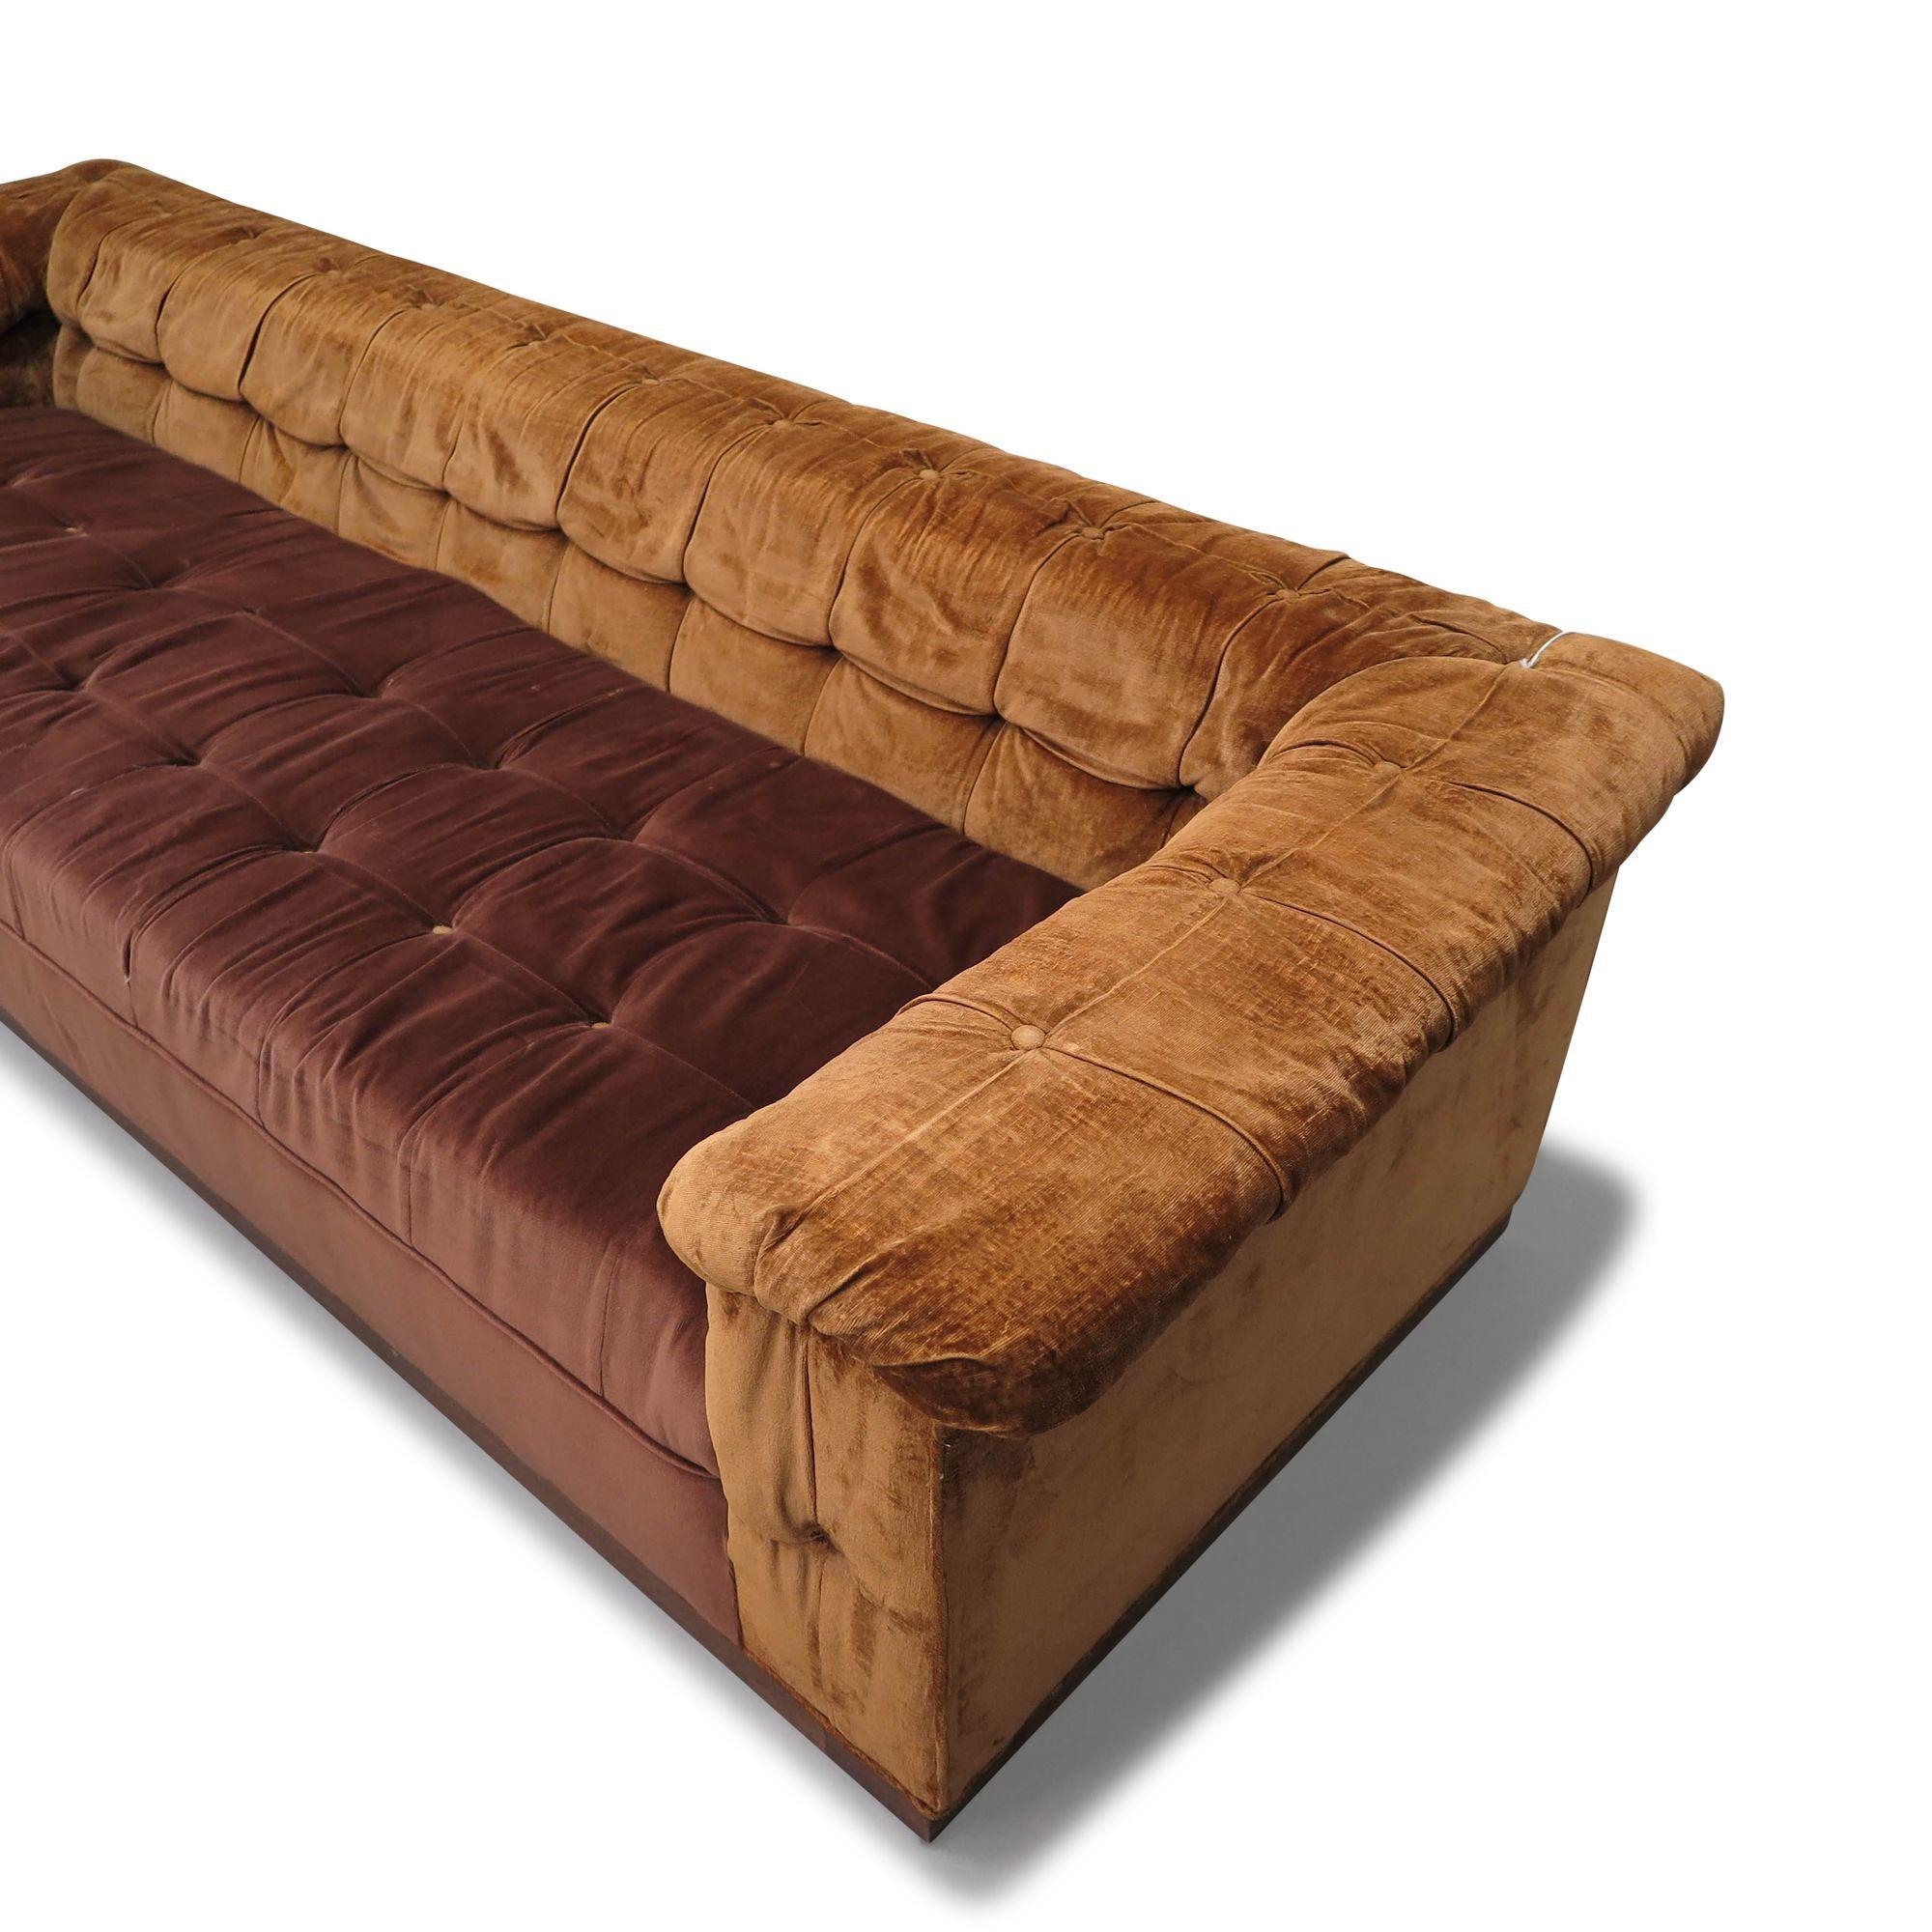 Mid-century sofa designed by Edward Wormley for Dunbar, Party sofa, Model 5407, United States, 1950. Crafted with a solid wood frame and inner spring seats, this sofa is upholstered in its original brown velvet fabric and supported by a solid plinth